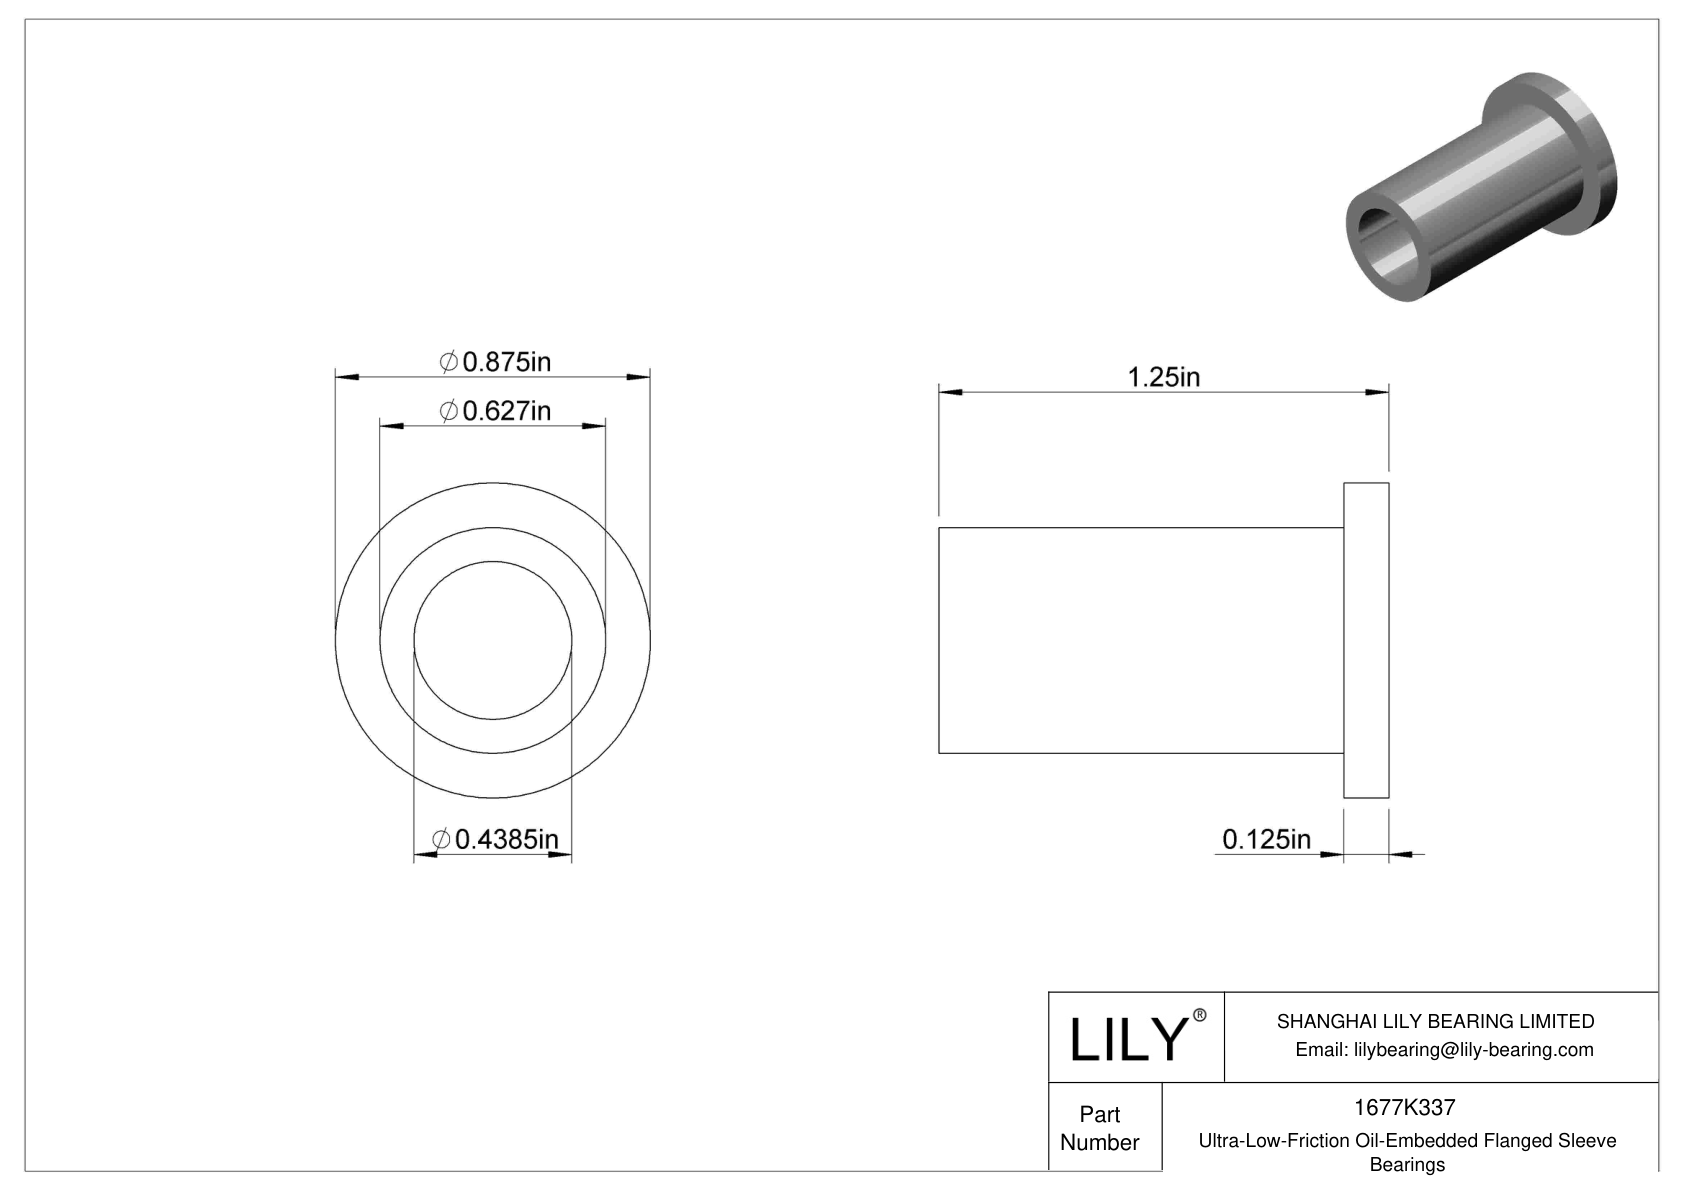 BGHHKDDH Ultra-Low-Friction Oil-Embedded Flanged Sleeve Bearings cad drawing